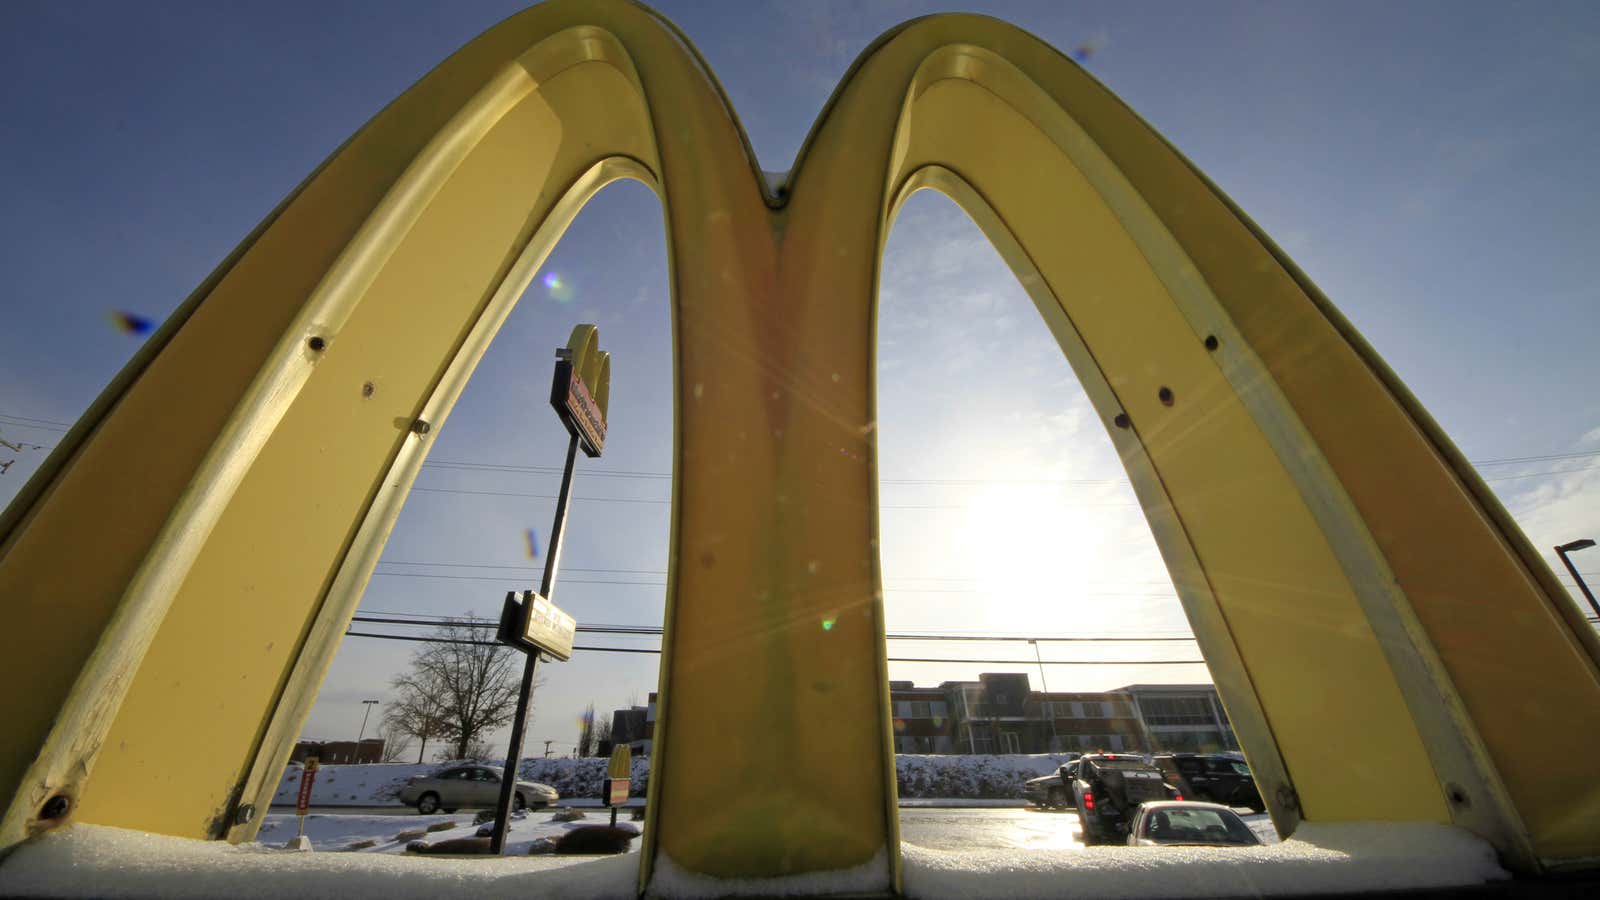 More Golden Arches are coming to that long stretch of German highway.